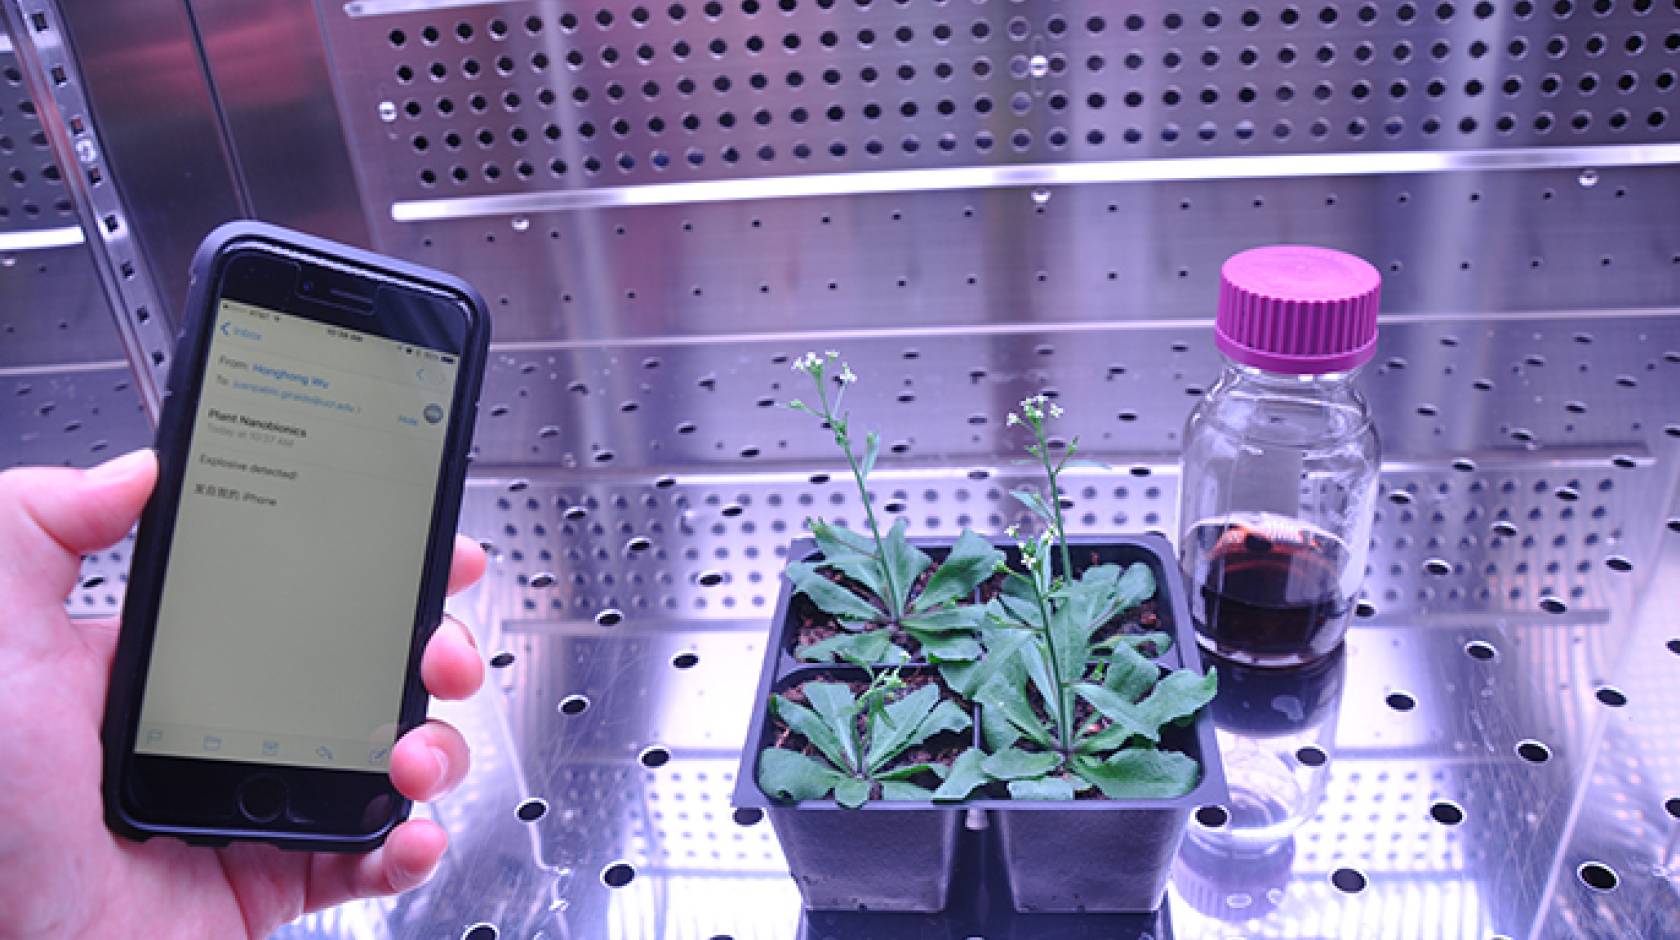 A team of scientists are embedding carbon nanotubes (right) in plants to detect explosives and wirelessly relay the information to an electronic device.